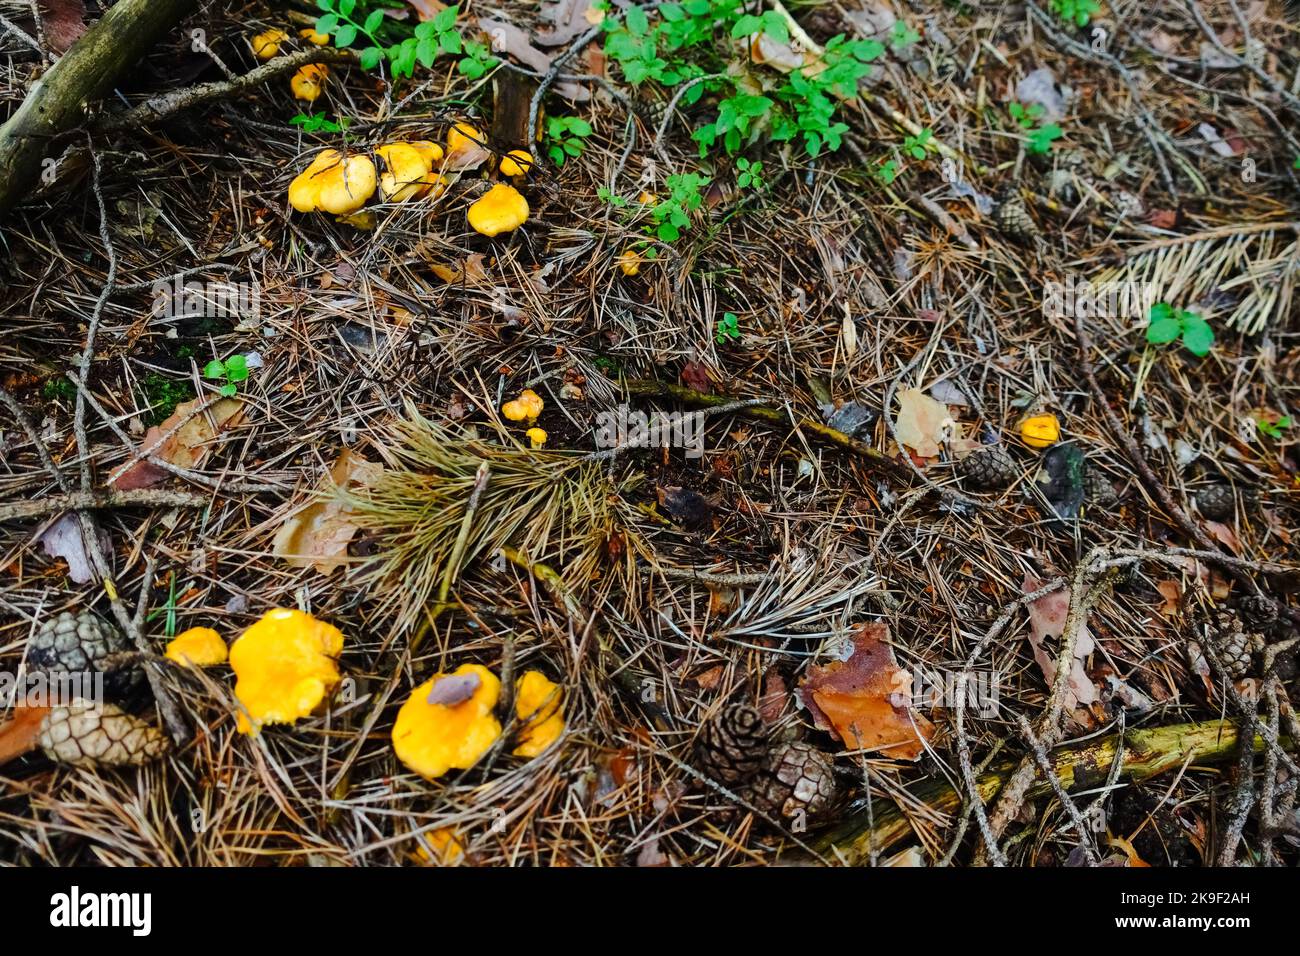 fresh yellow chanterelles in the forest floor with many needles Stock Photo